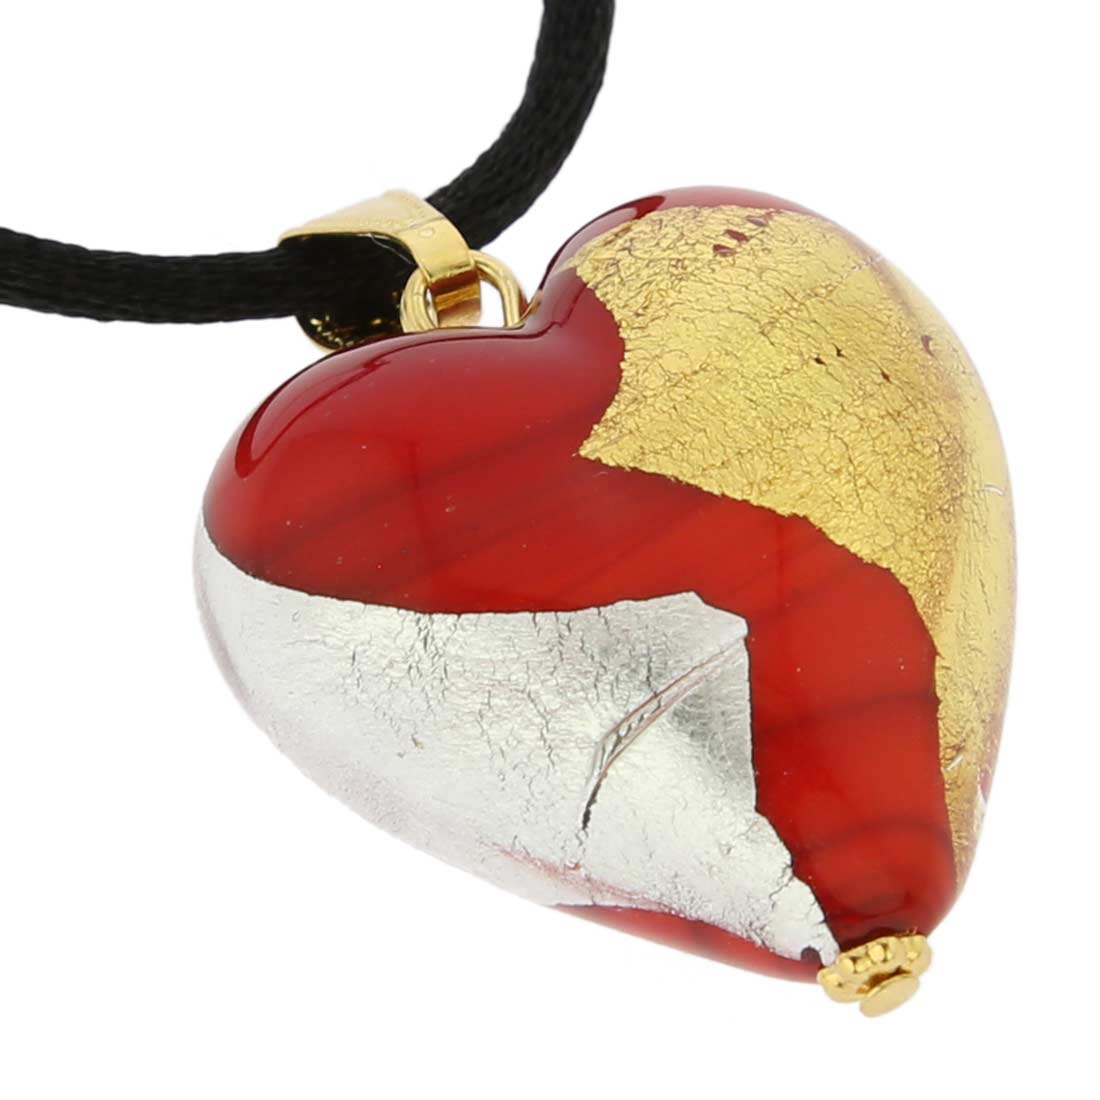 Murano Heart Pendant - Red Gold and Silver